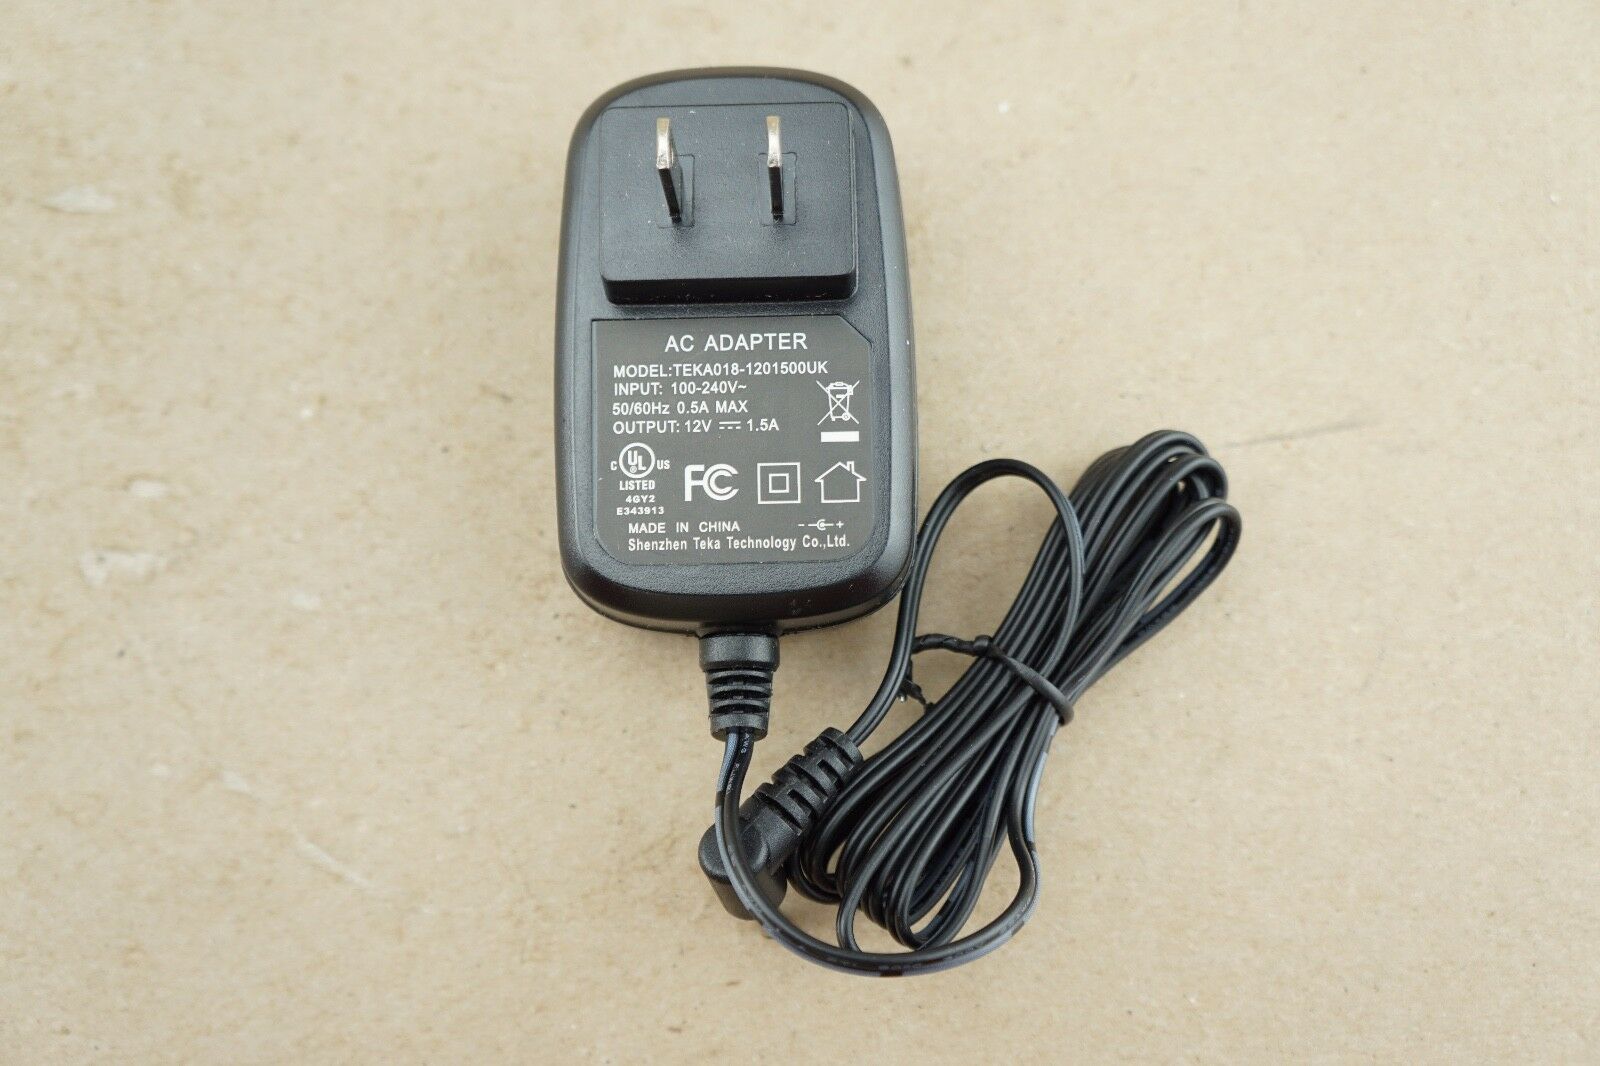 New 12V 1.5A TEKA018-1201500Uk Adapter power supply charger use in LED light